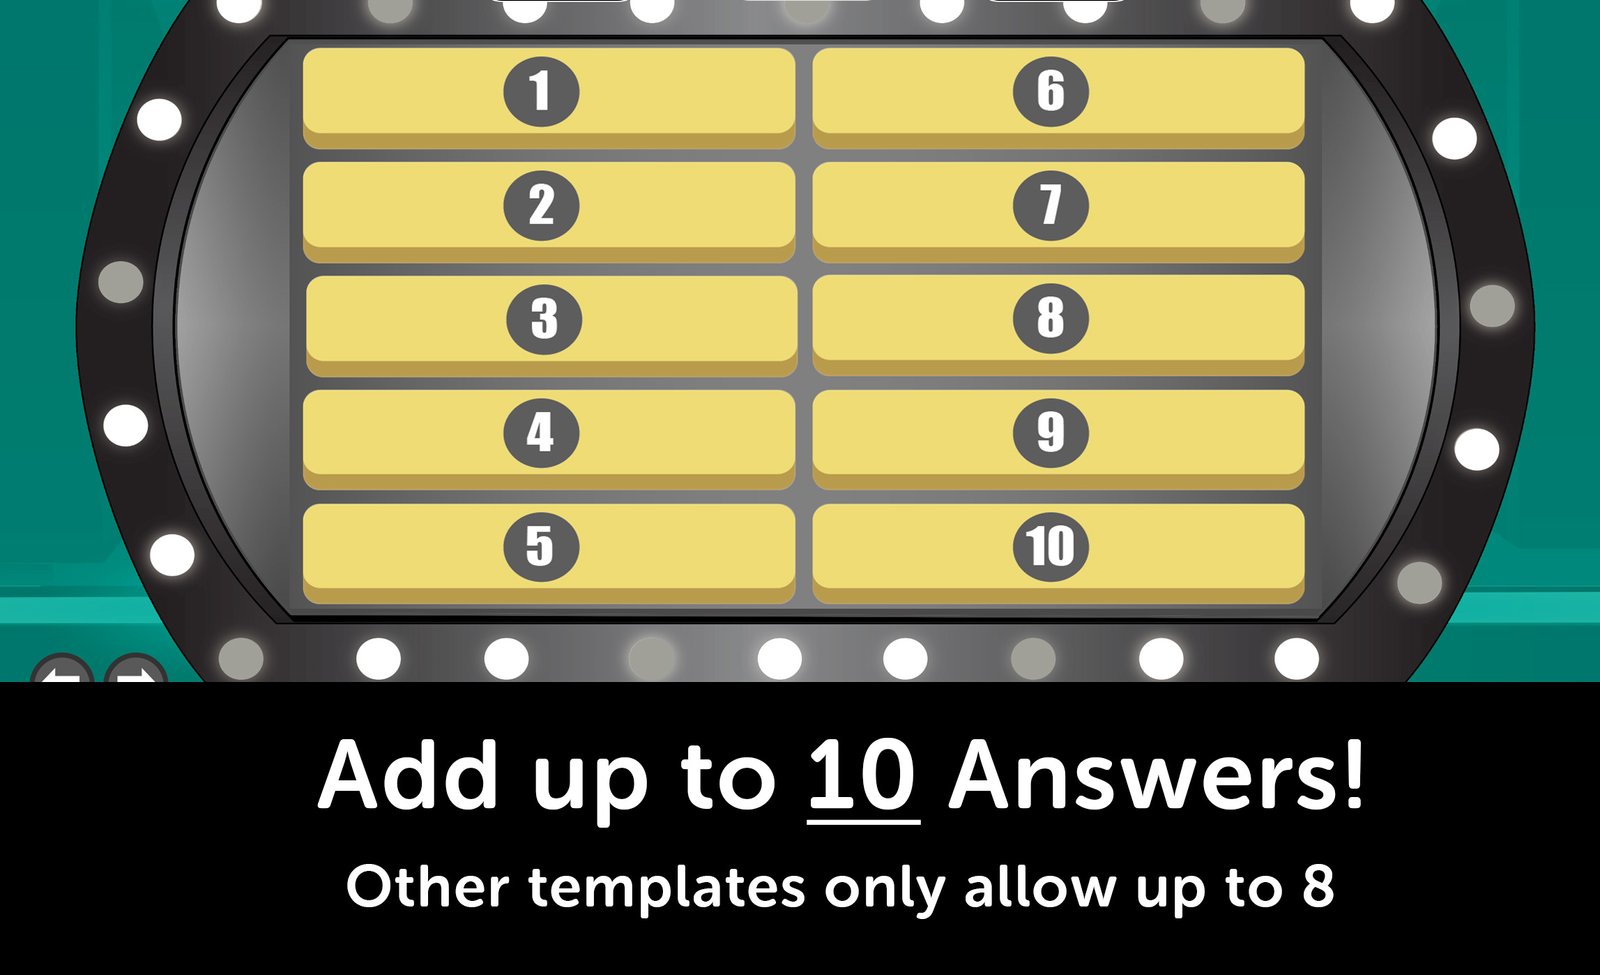 Family Feud Style Game show Mac PC and iPad compatible Customizable